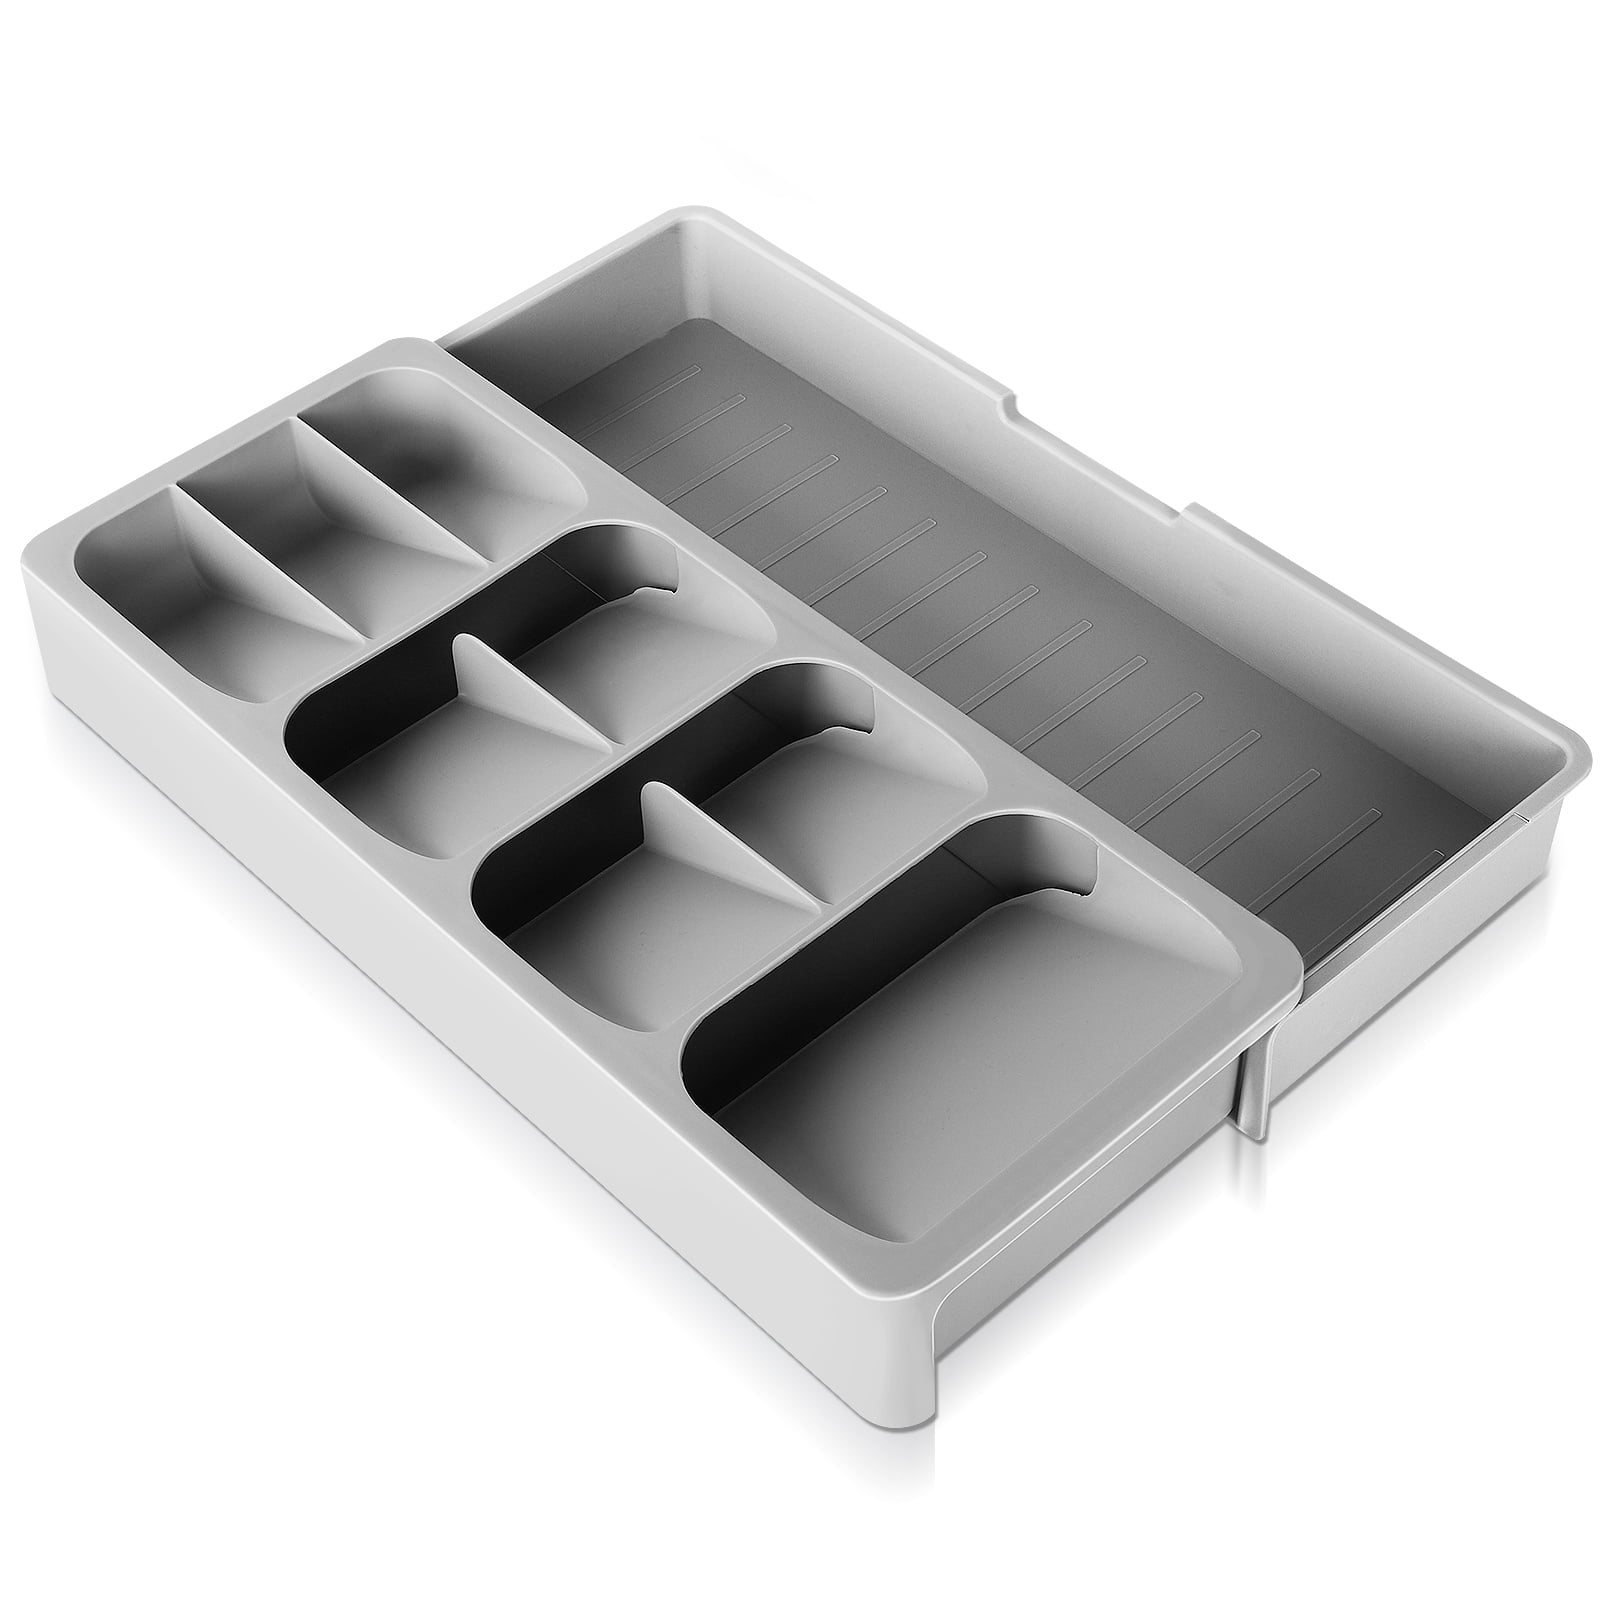 Expanding Cutlery Tray Kitchen Drawer Organiser with Sections 730/825/925 x 550 